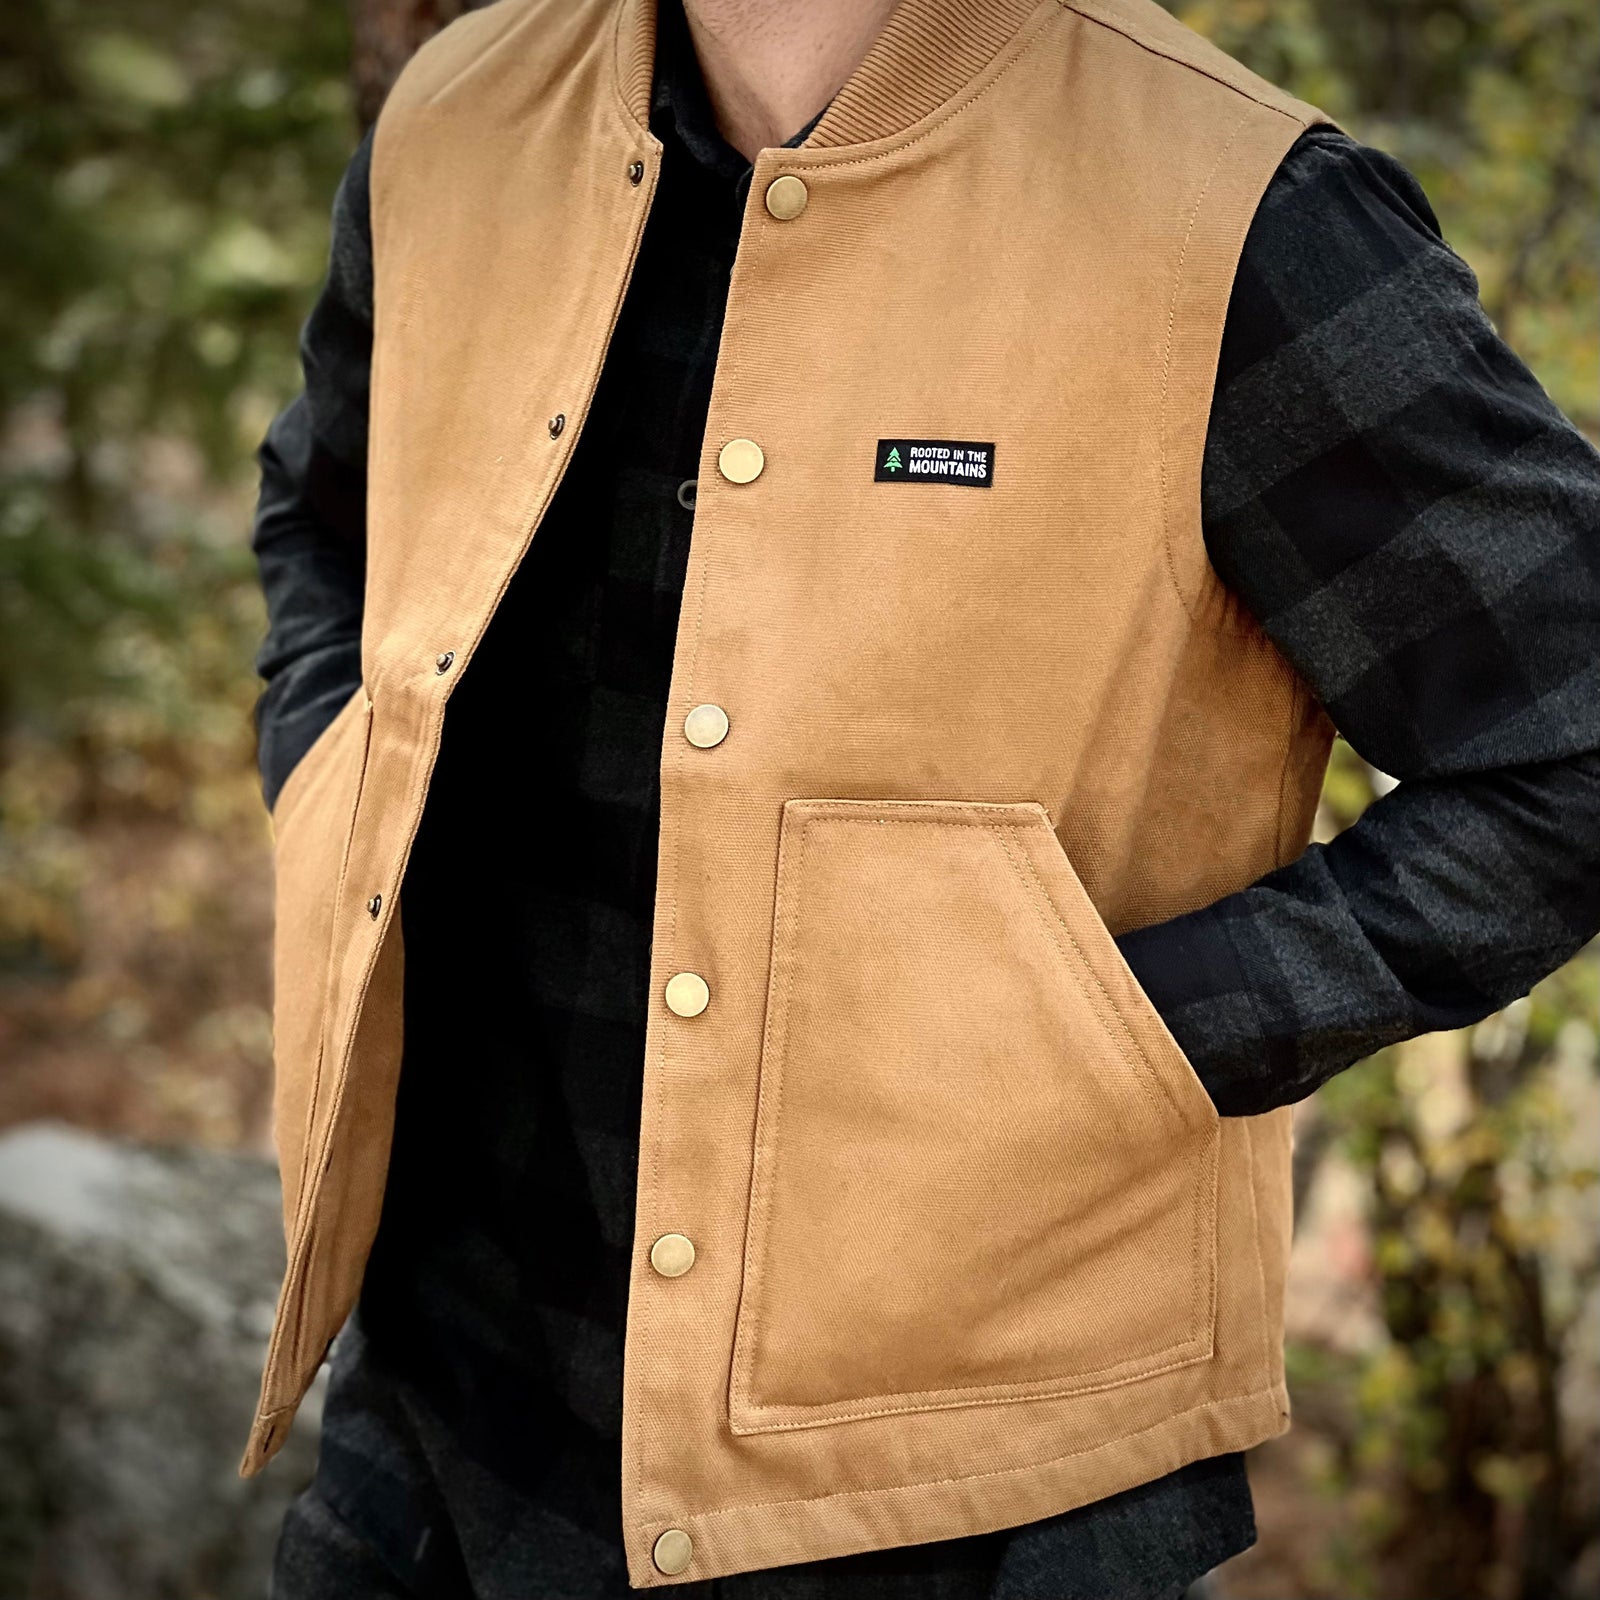 The Pursuer Workwear Vest w/ Rooted In The Mountains Label